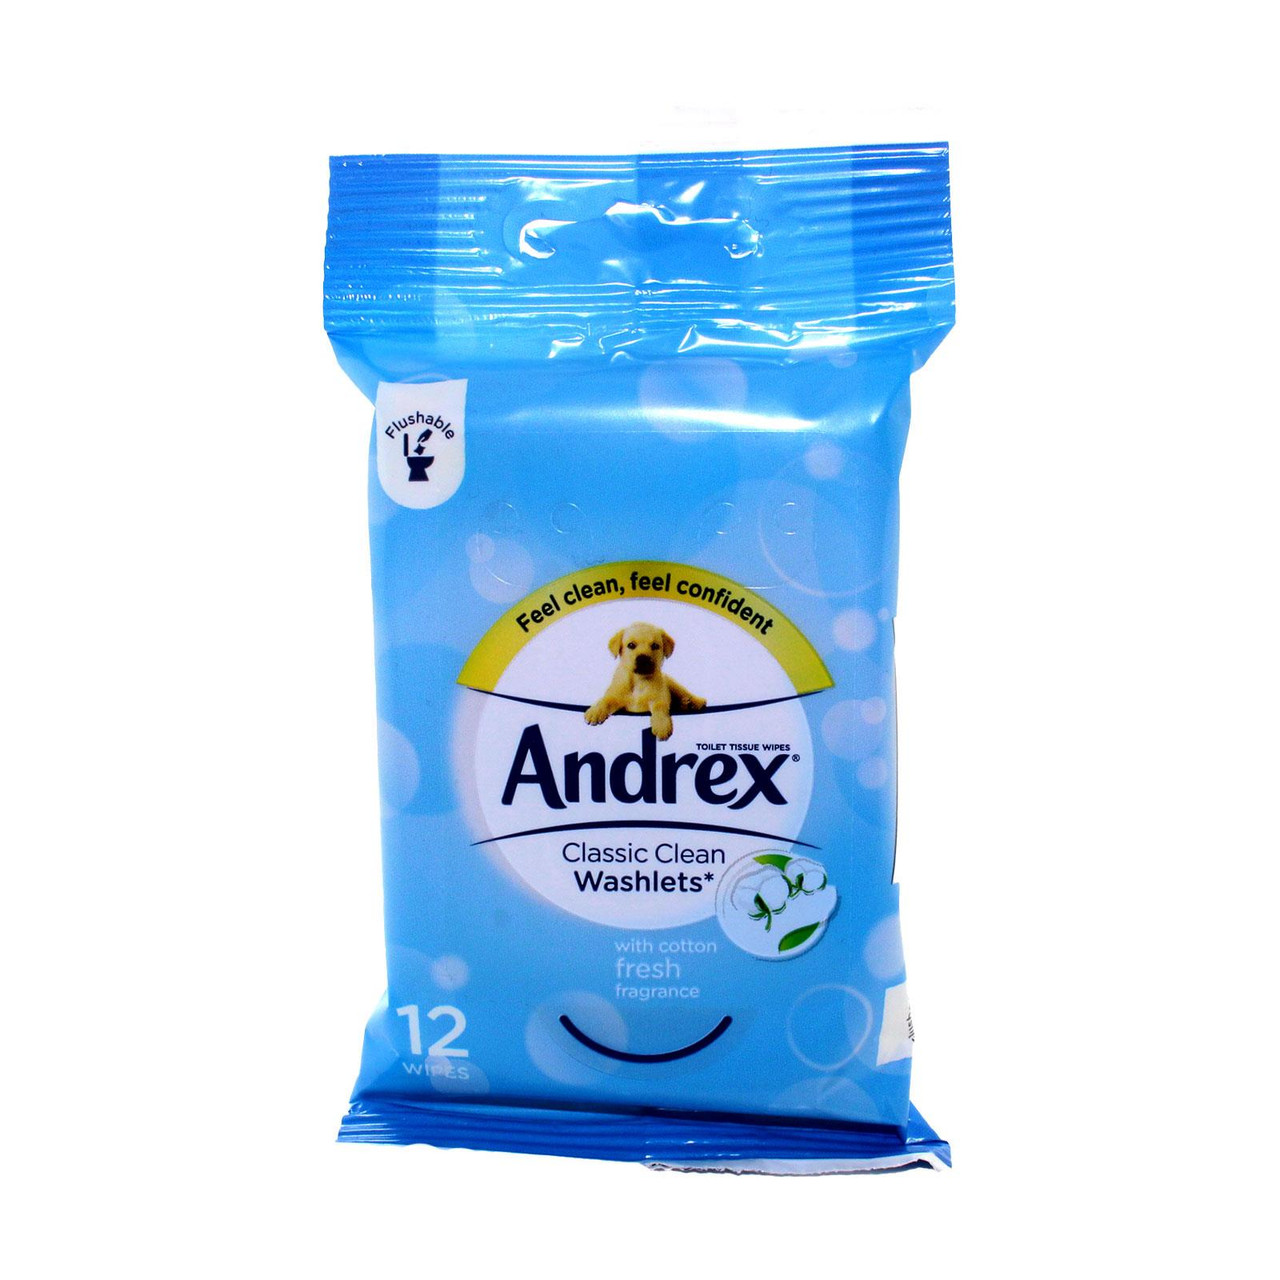 andrex washlets travel pack discontinued